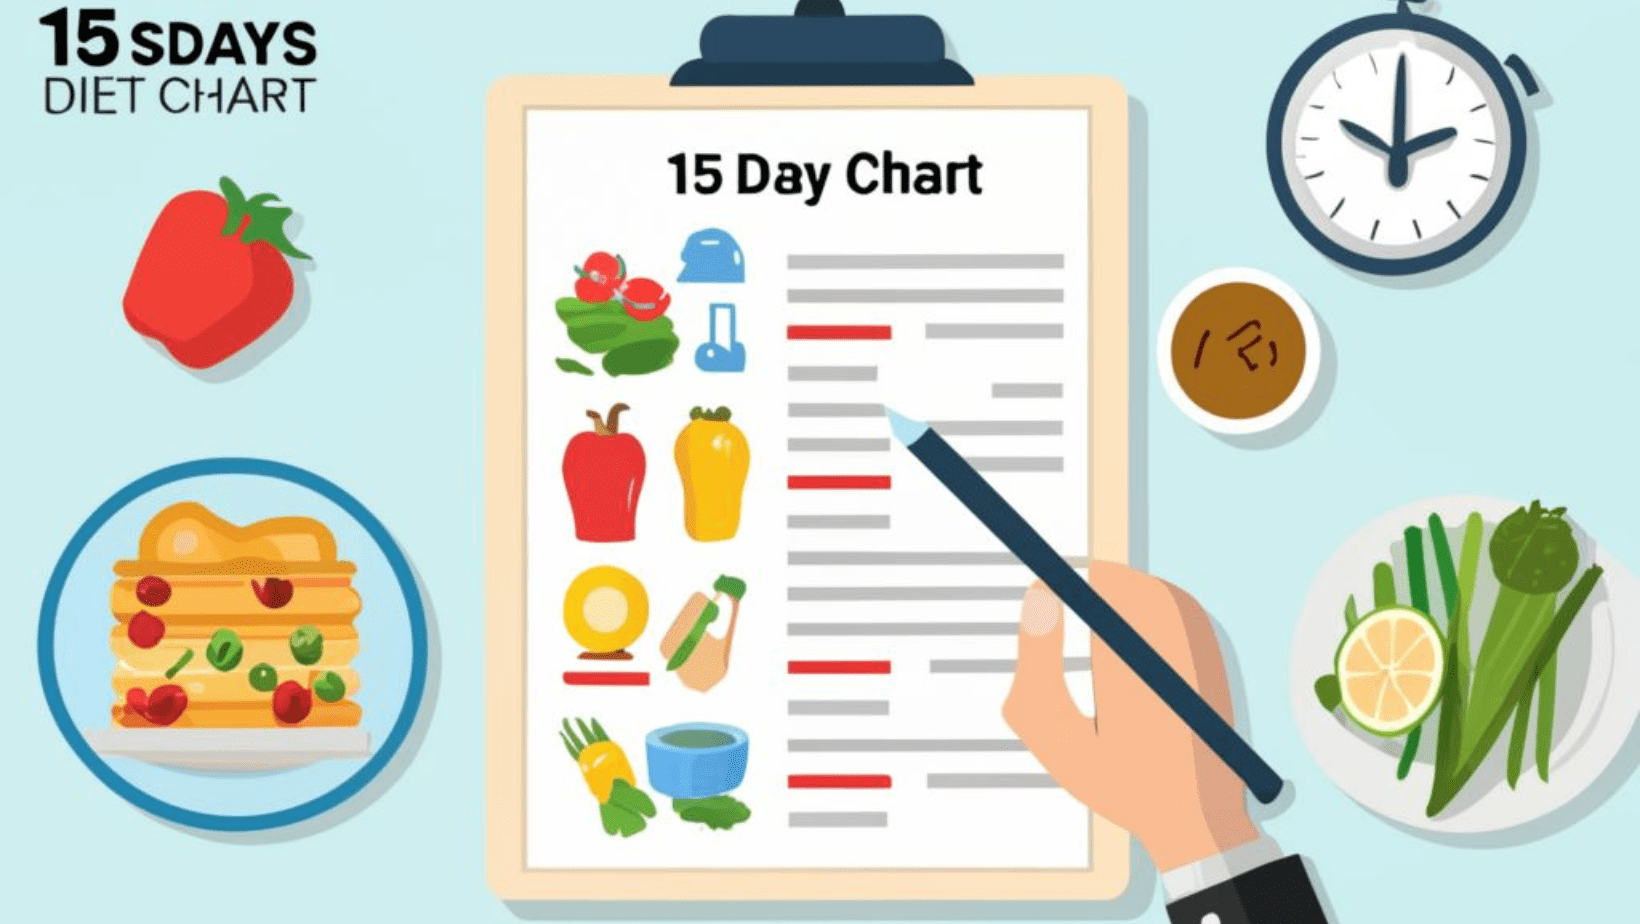 15 Days Diet Chart for weight loss